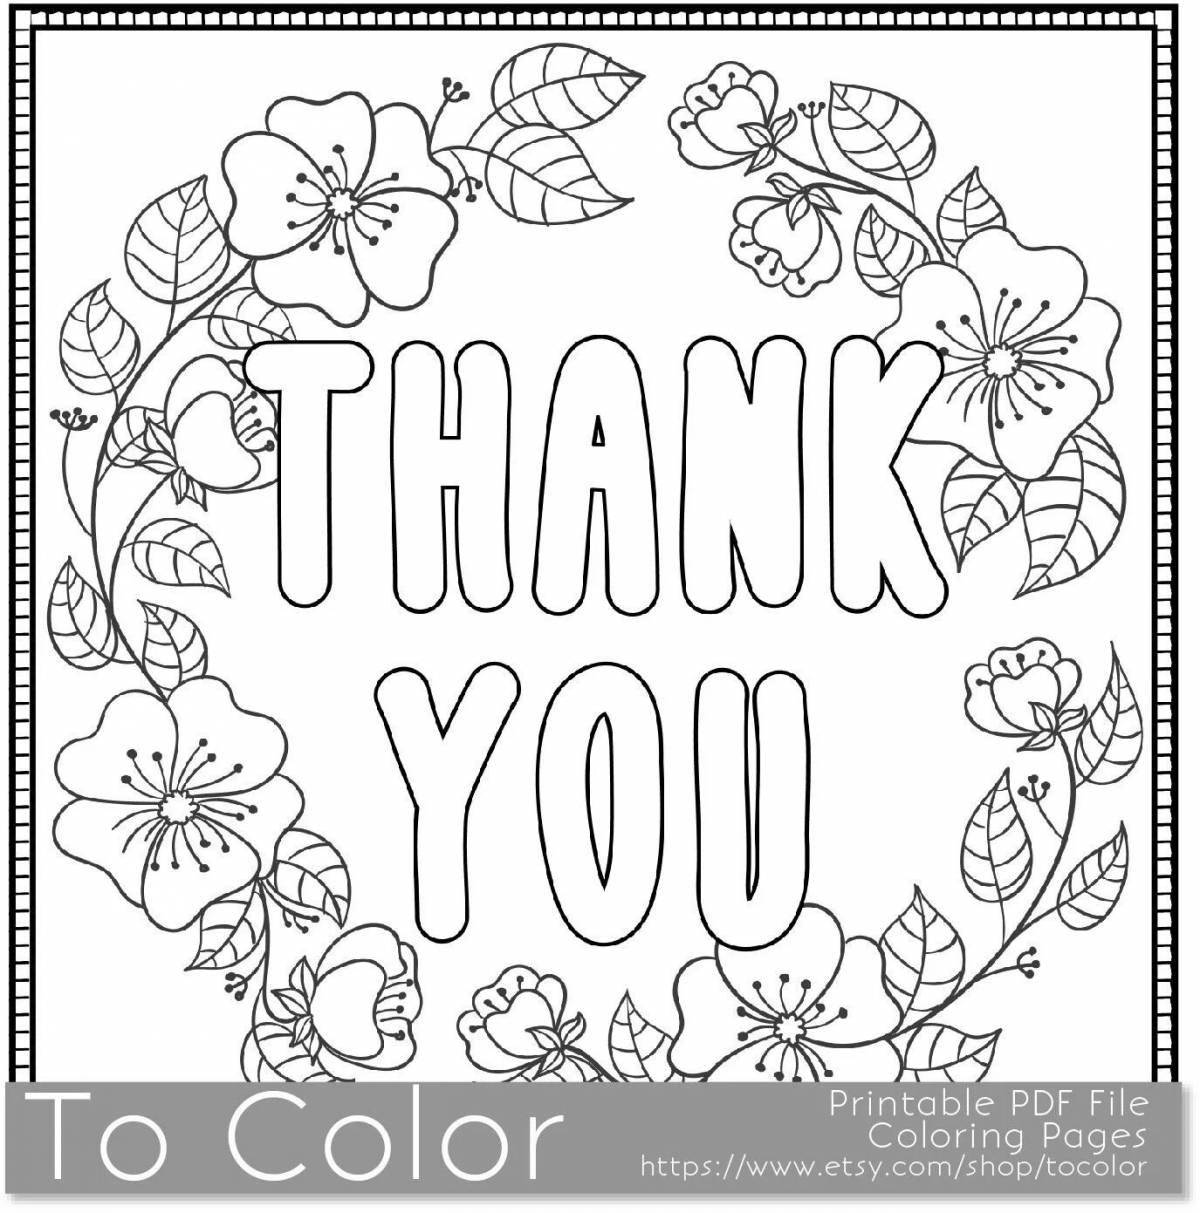 Fun Thanksgiving Coloring Page for Kids